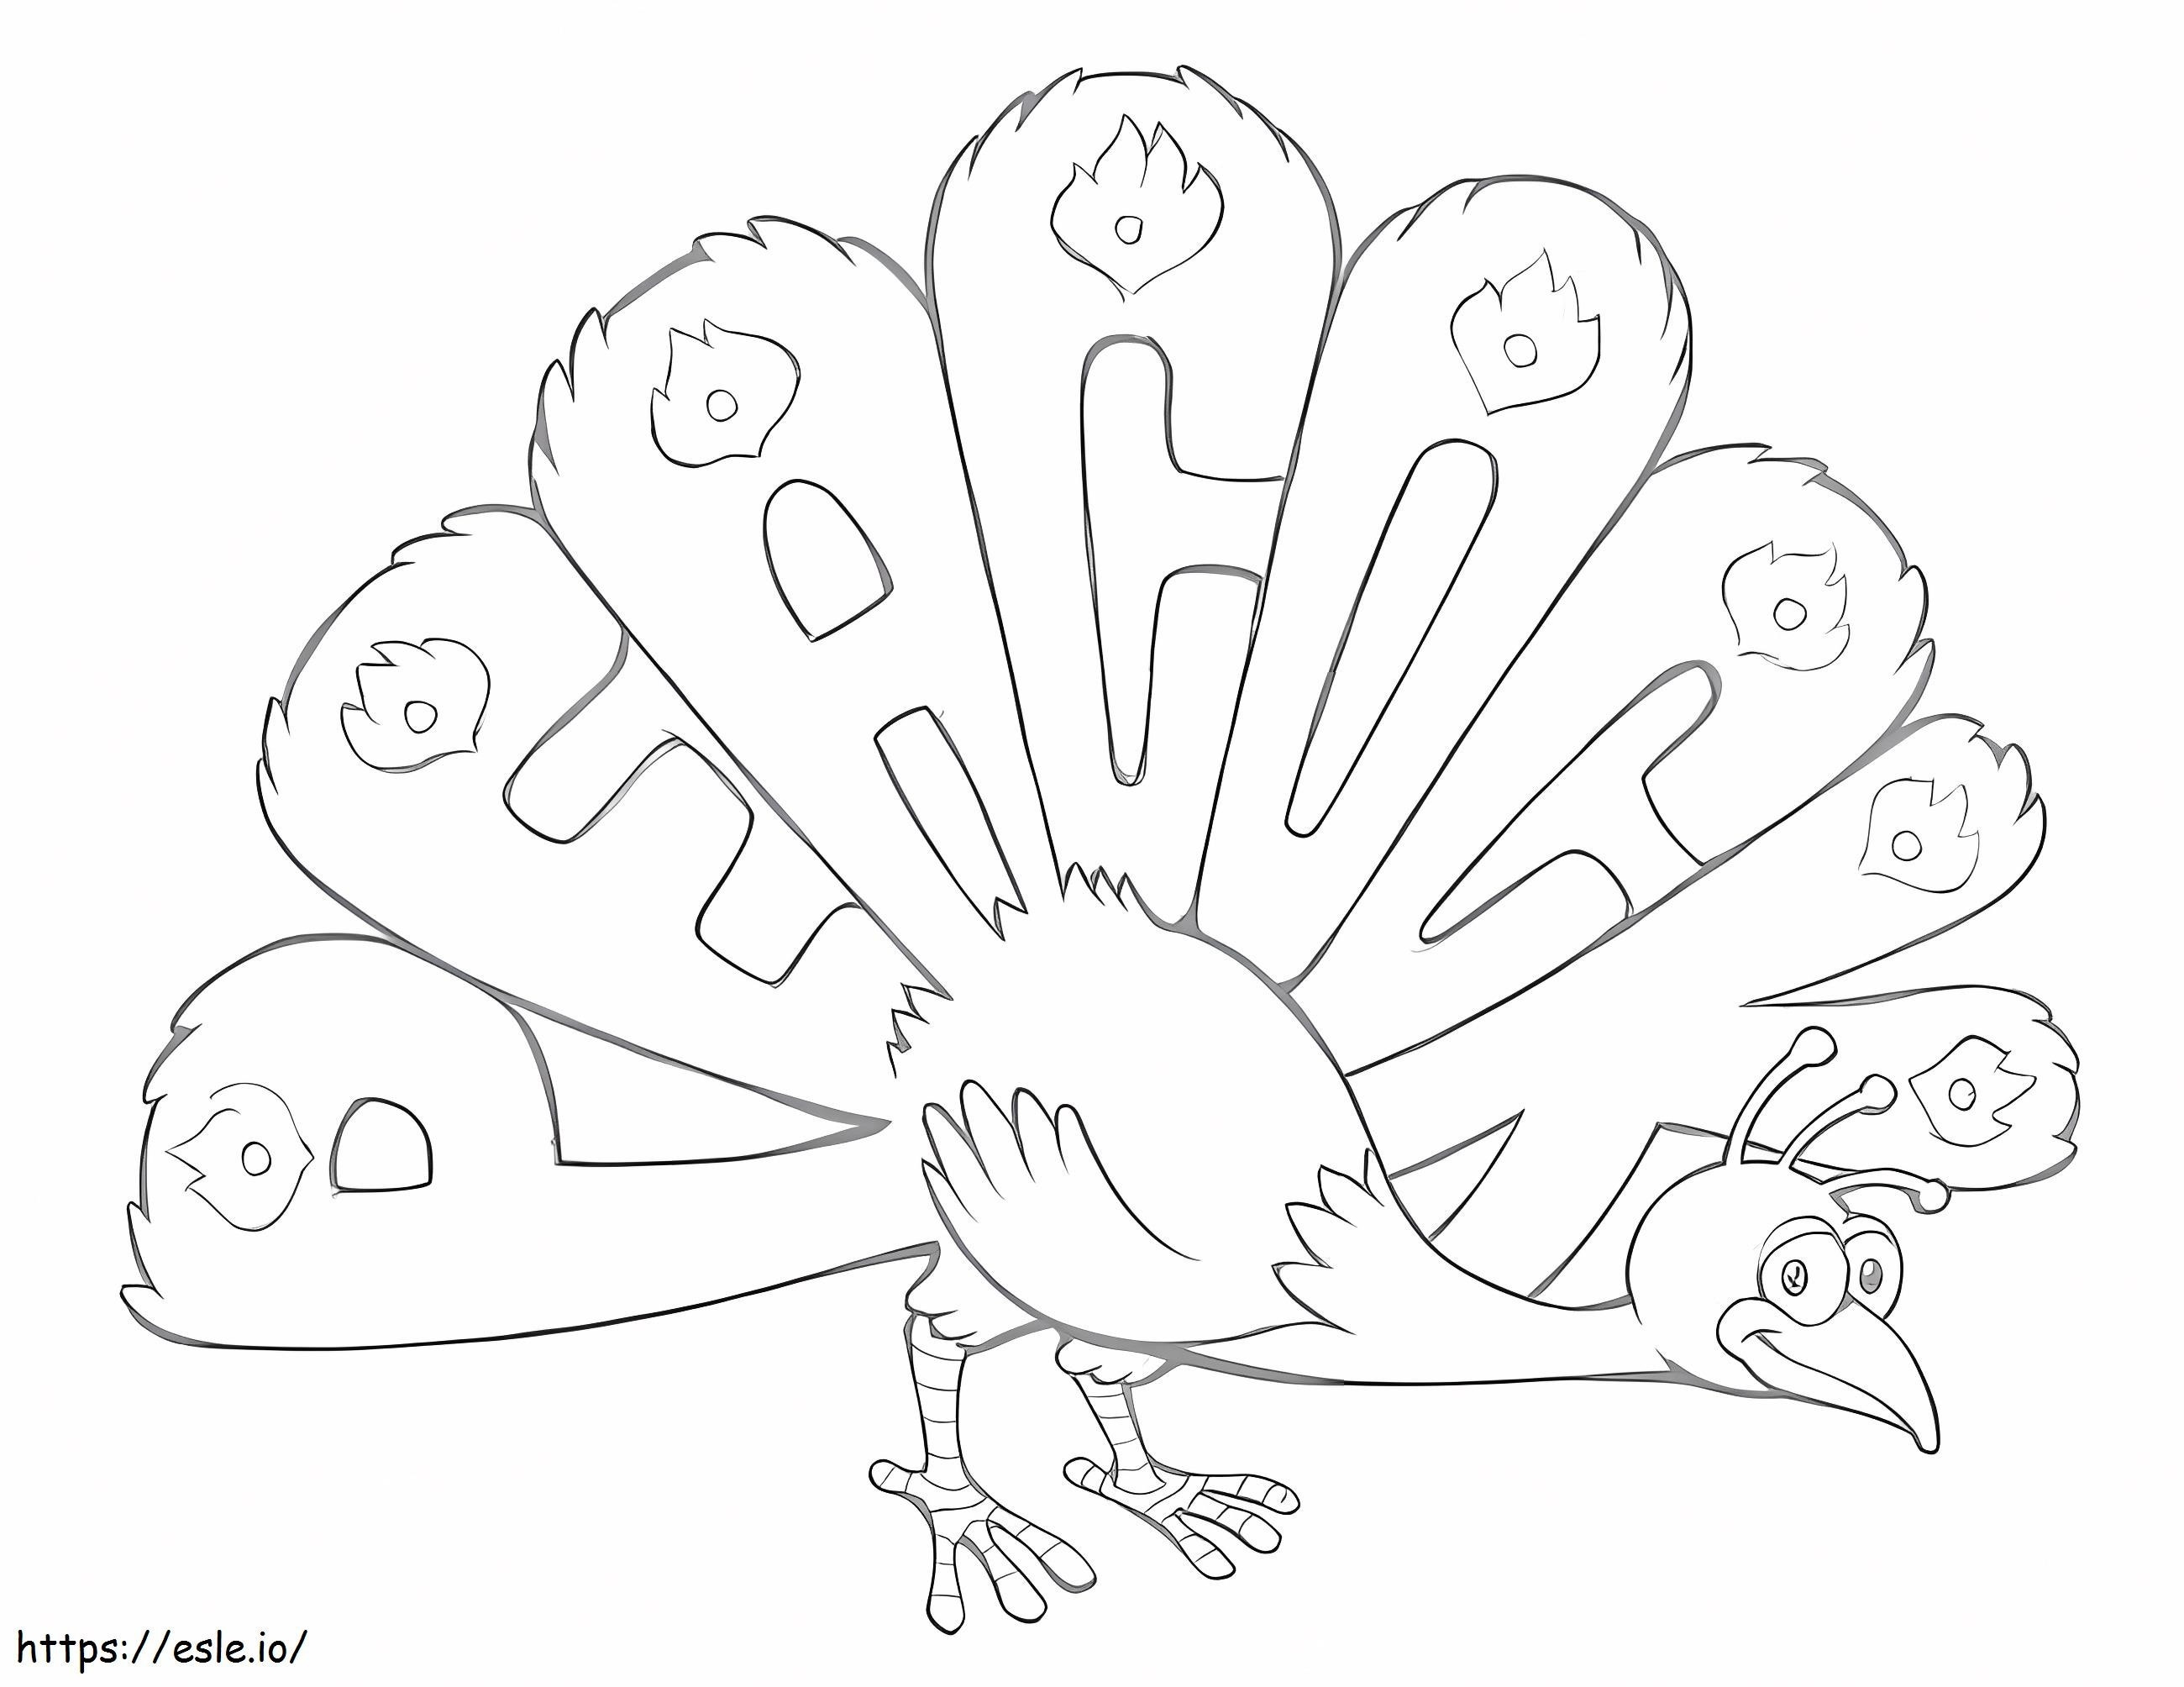 WordWold Peacock coloring page